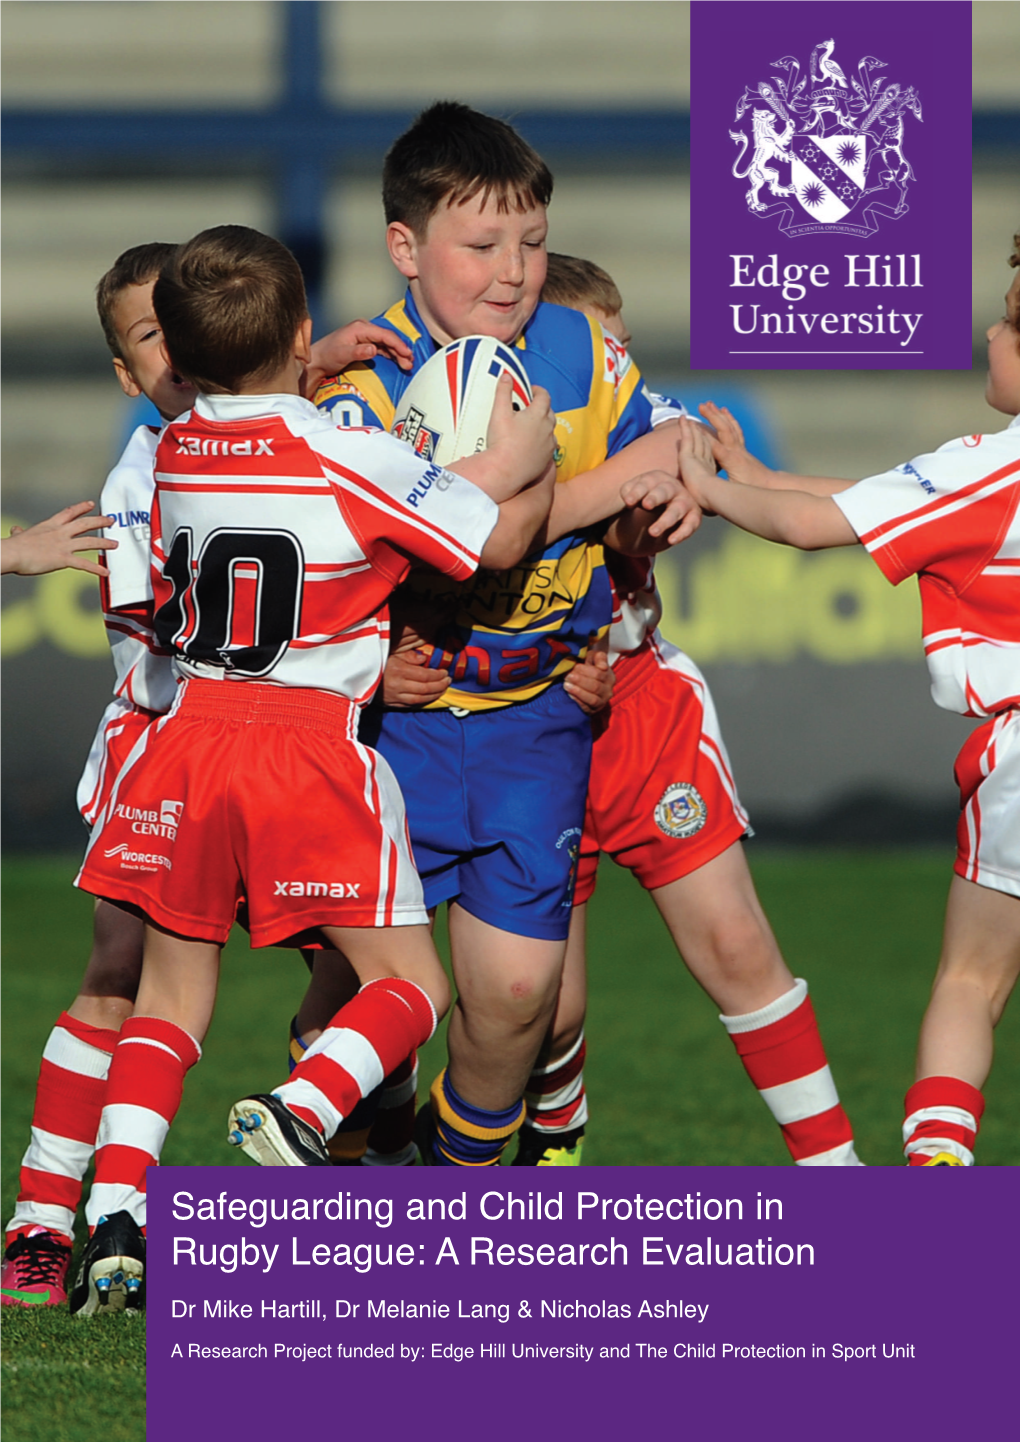 Safeguarding and Child Protection in Rugby League: a Research Evaluation